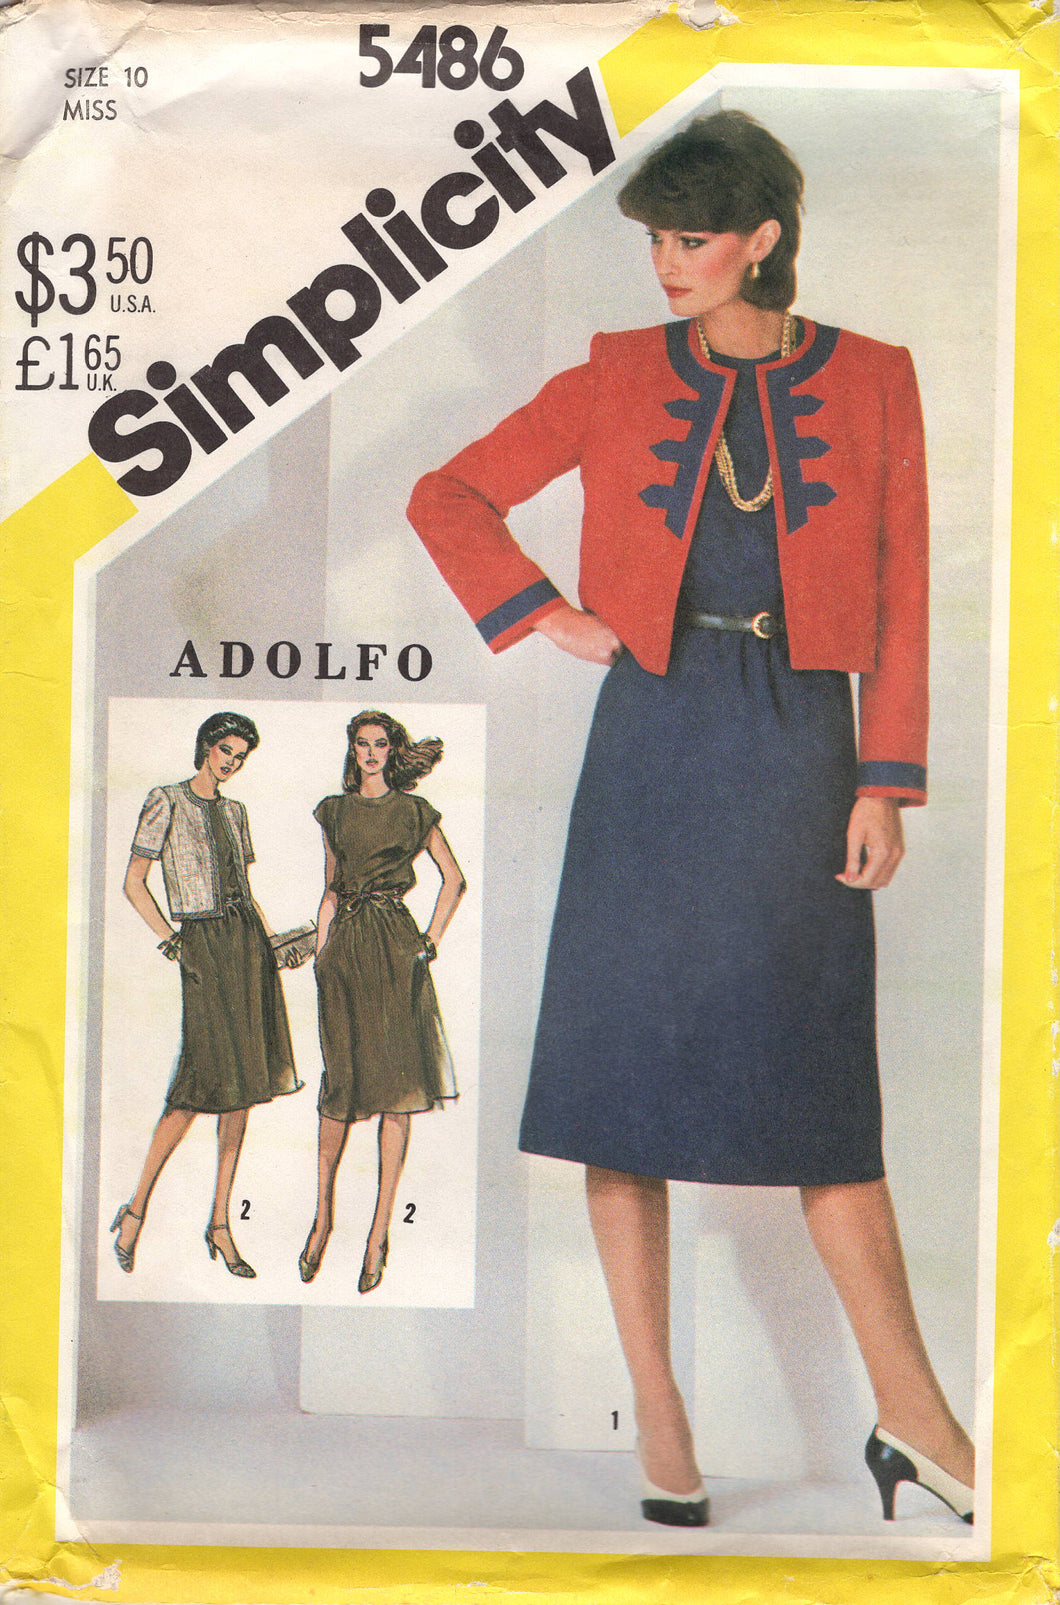 1980's Simplicity One Piece Fit and Flare Dress and Boxy Jacket Pattern - Bust 32.5-38